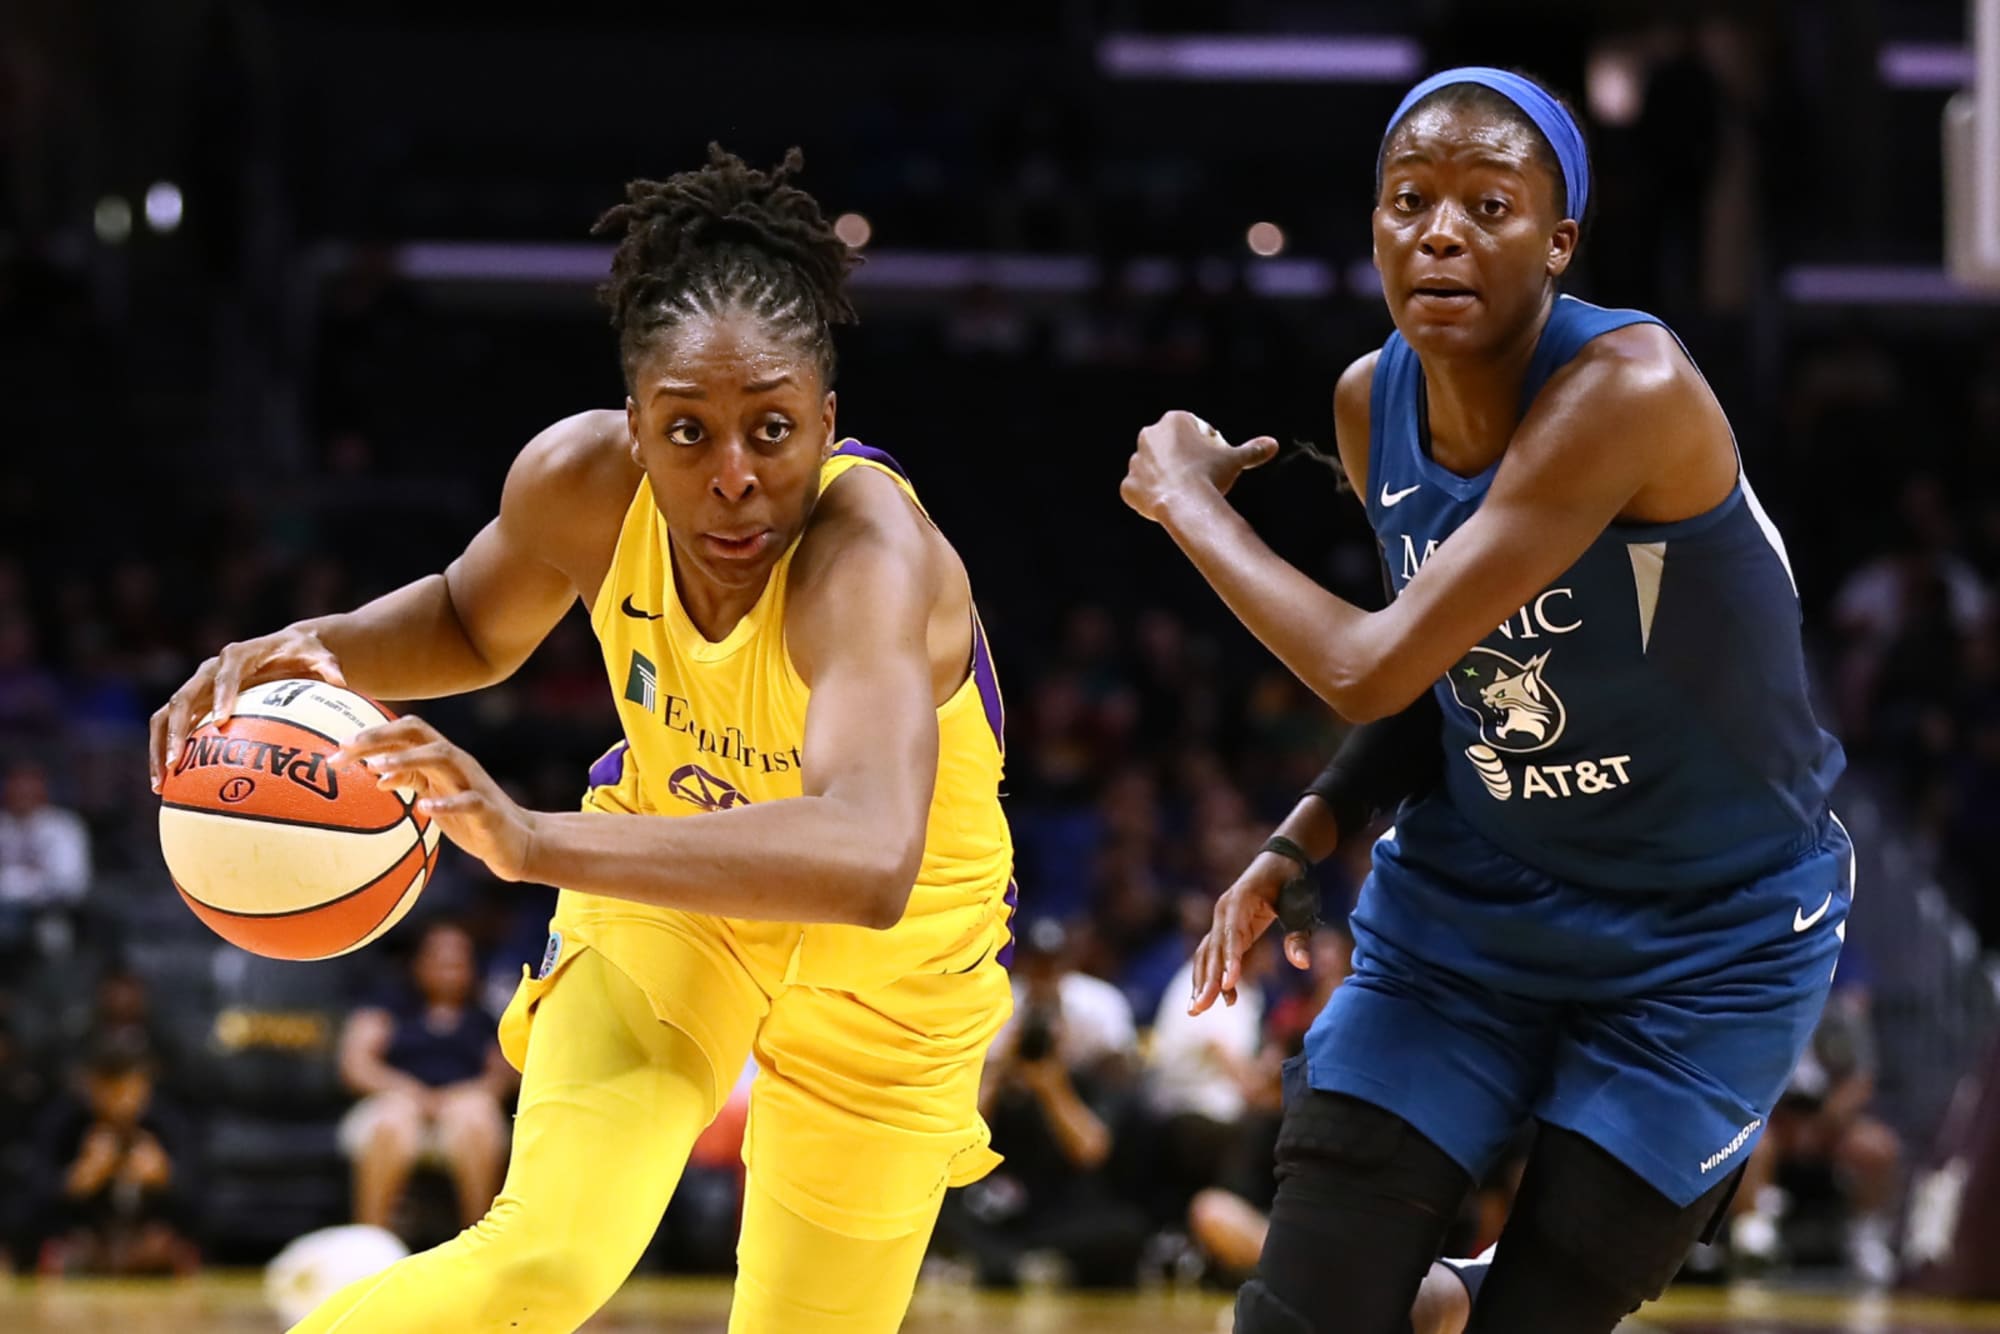 WNBA news: LA Sparks finalize 2020 roster with series of moves